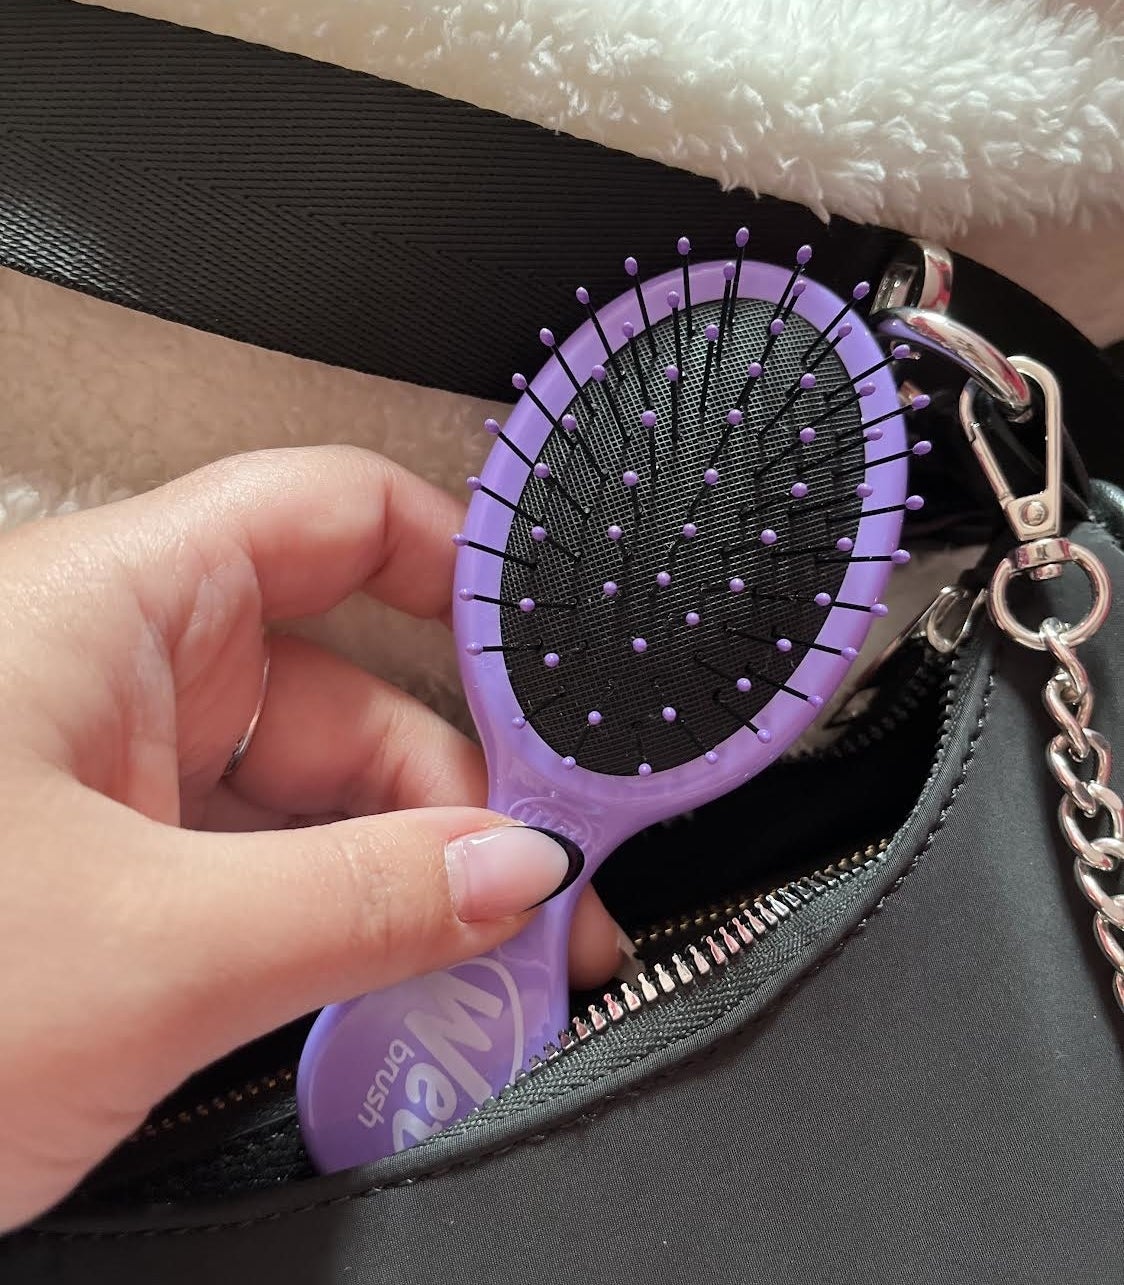 Bianca pulling the mini brush out of her purse